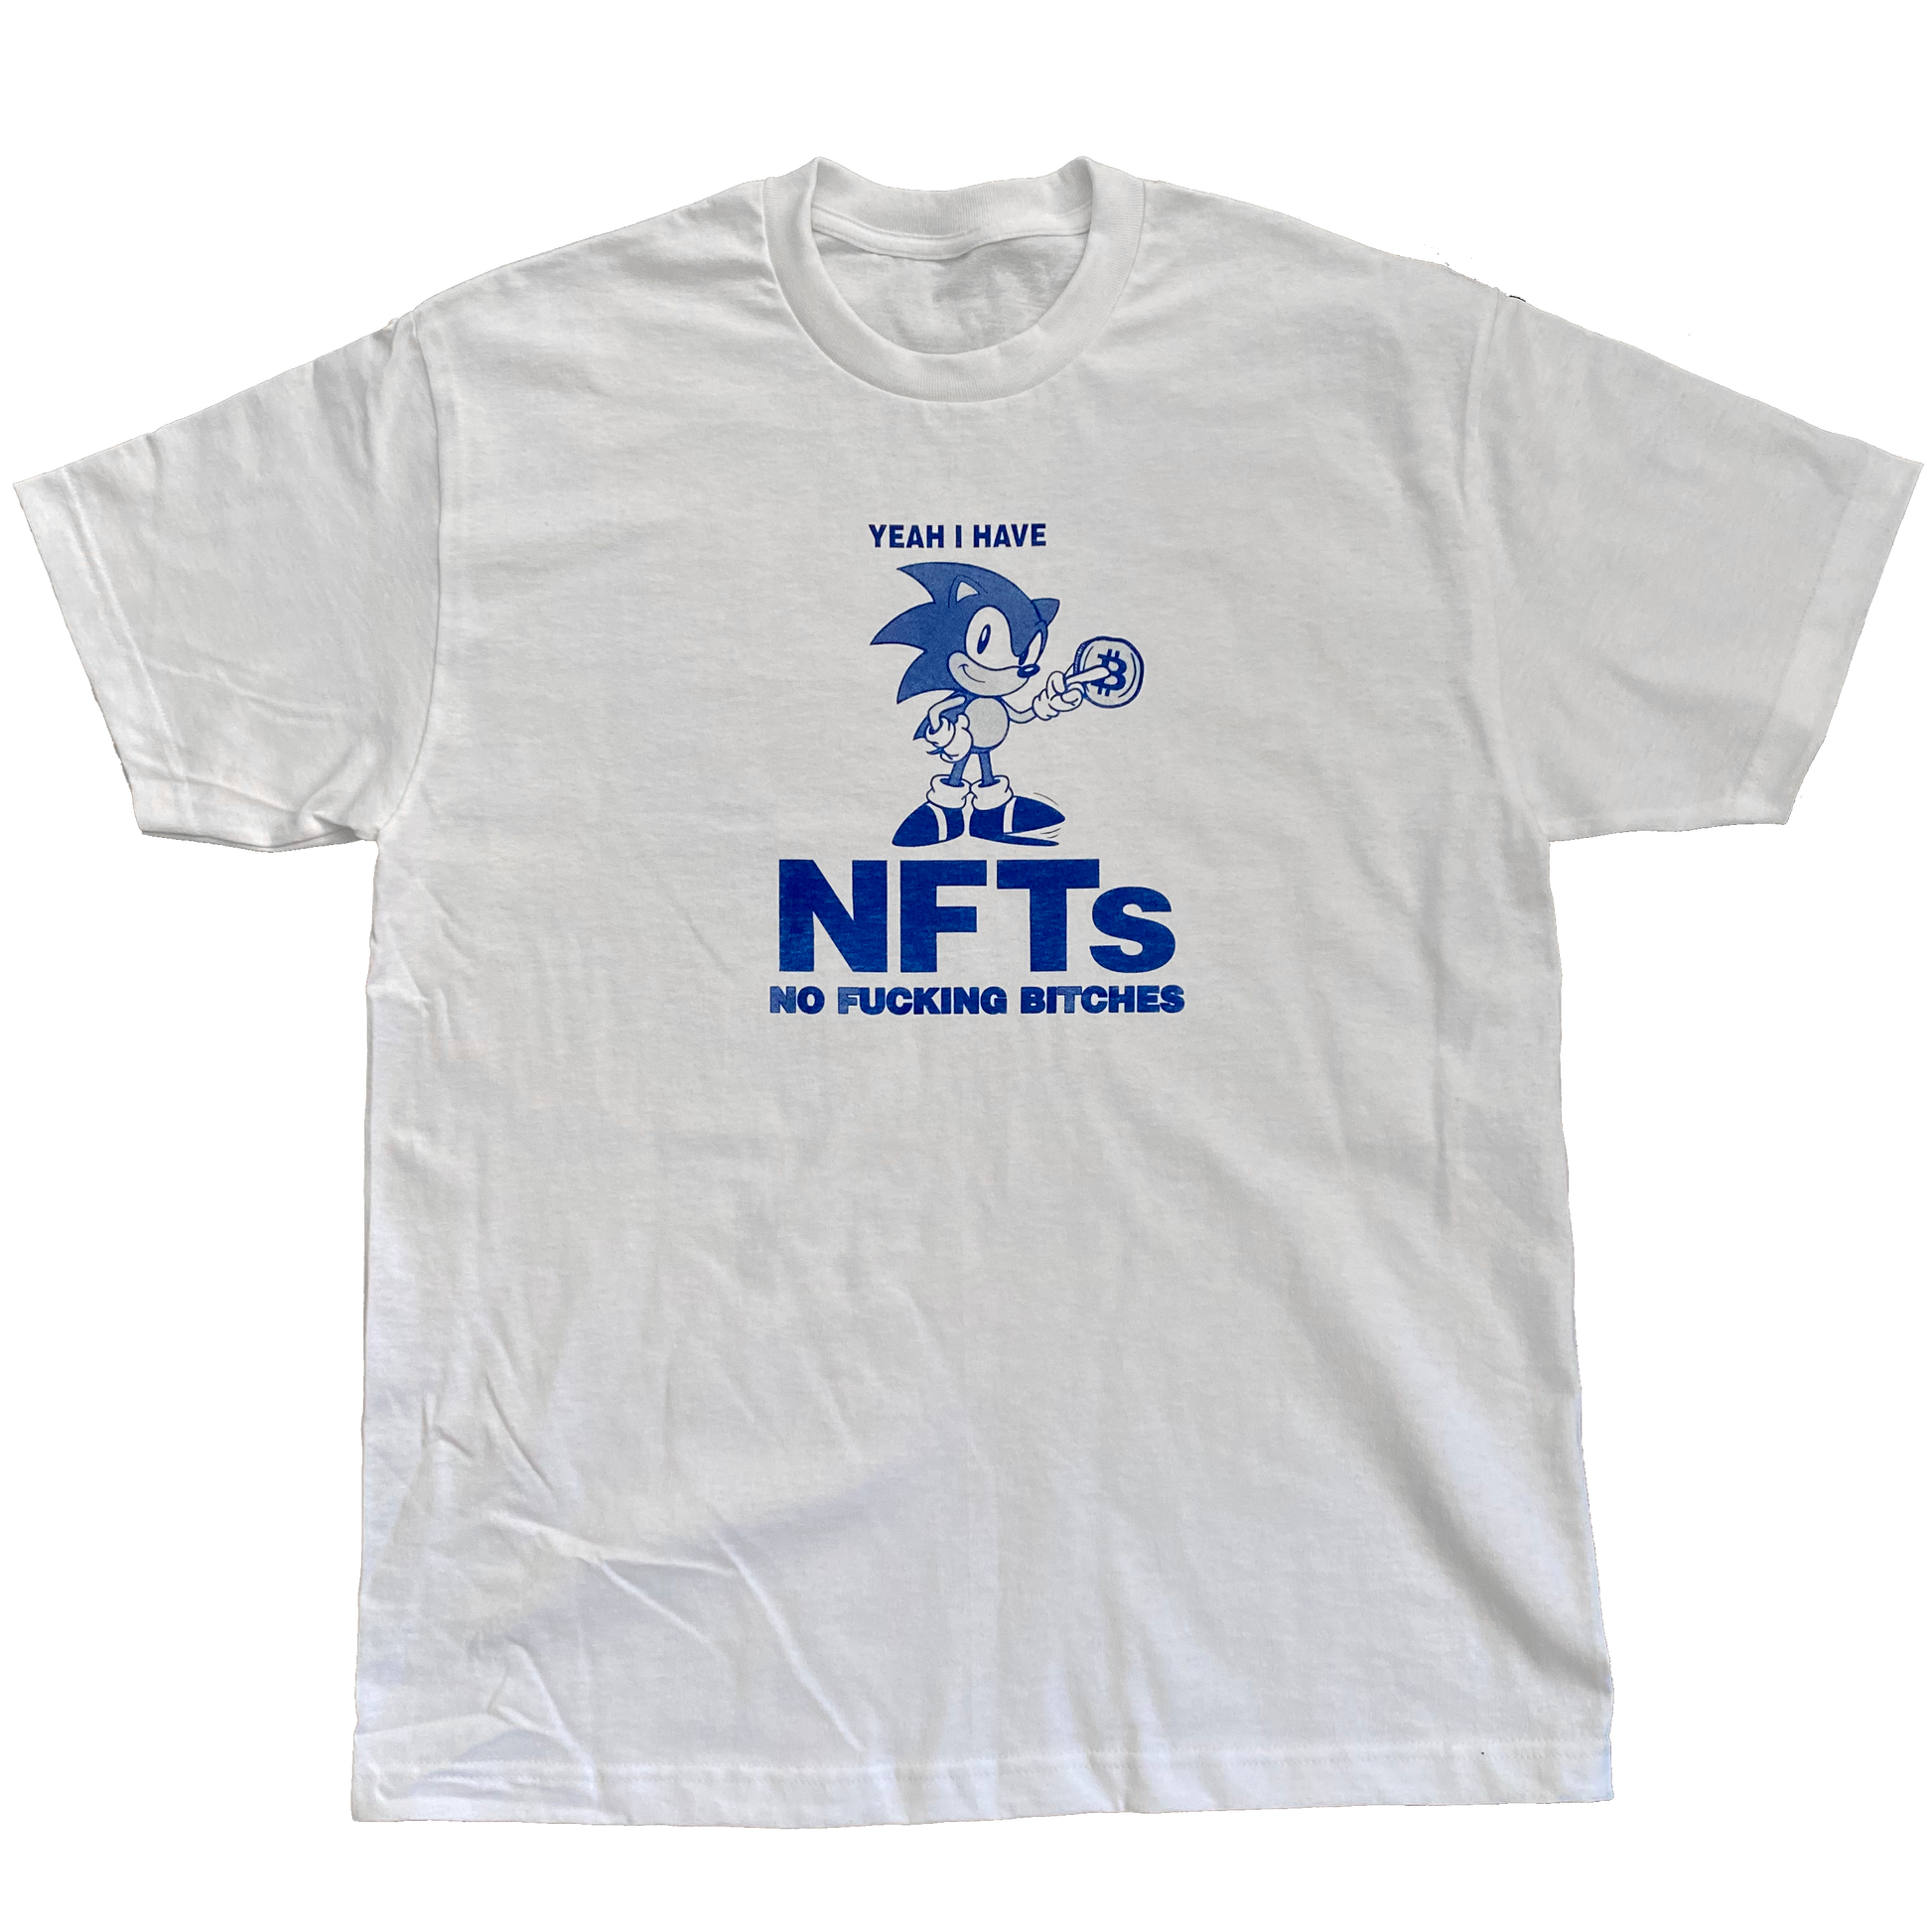 yea i have nfts no fucking bitches shirt sonic crying in the club 1